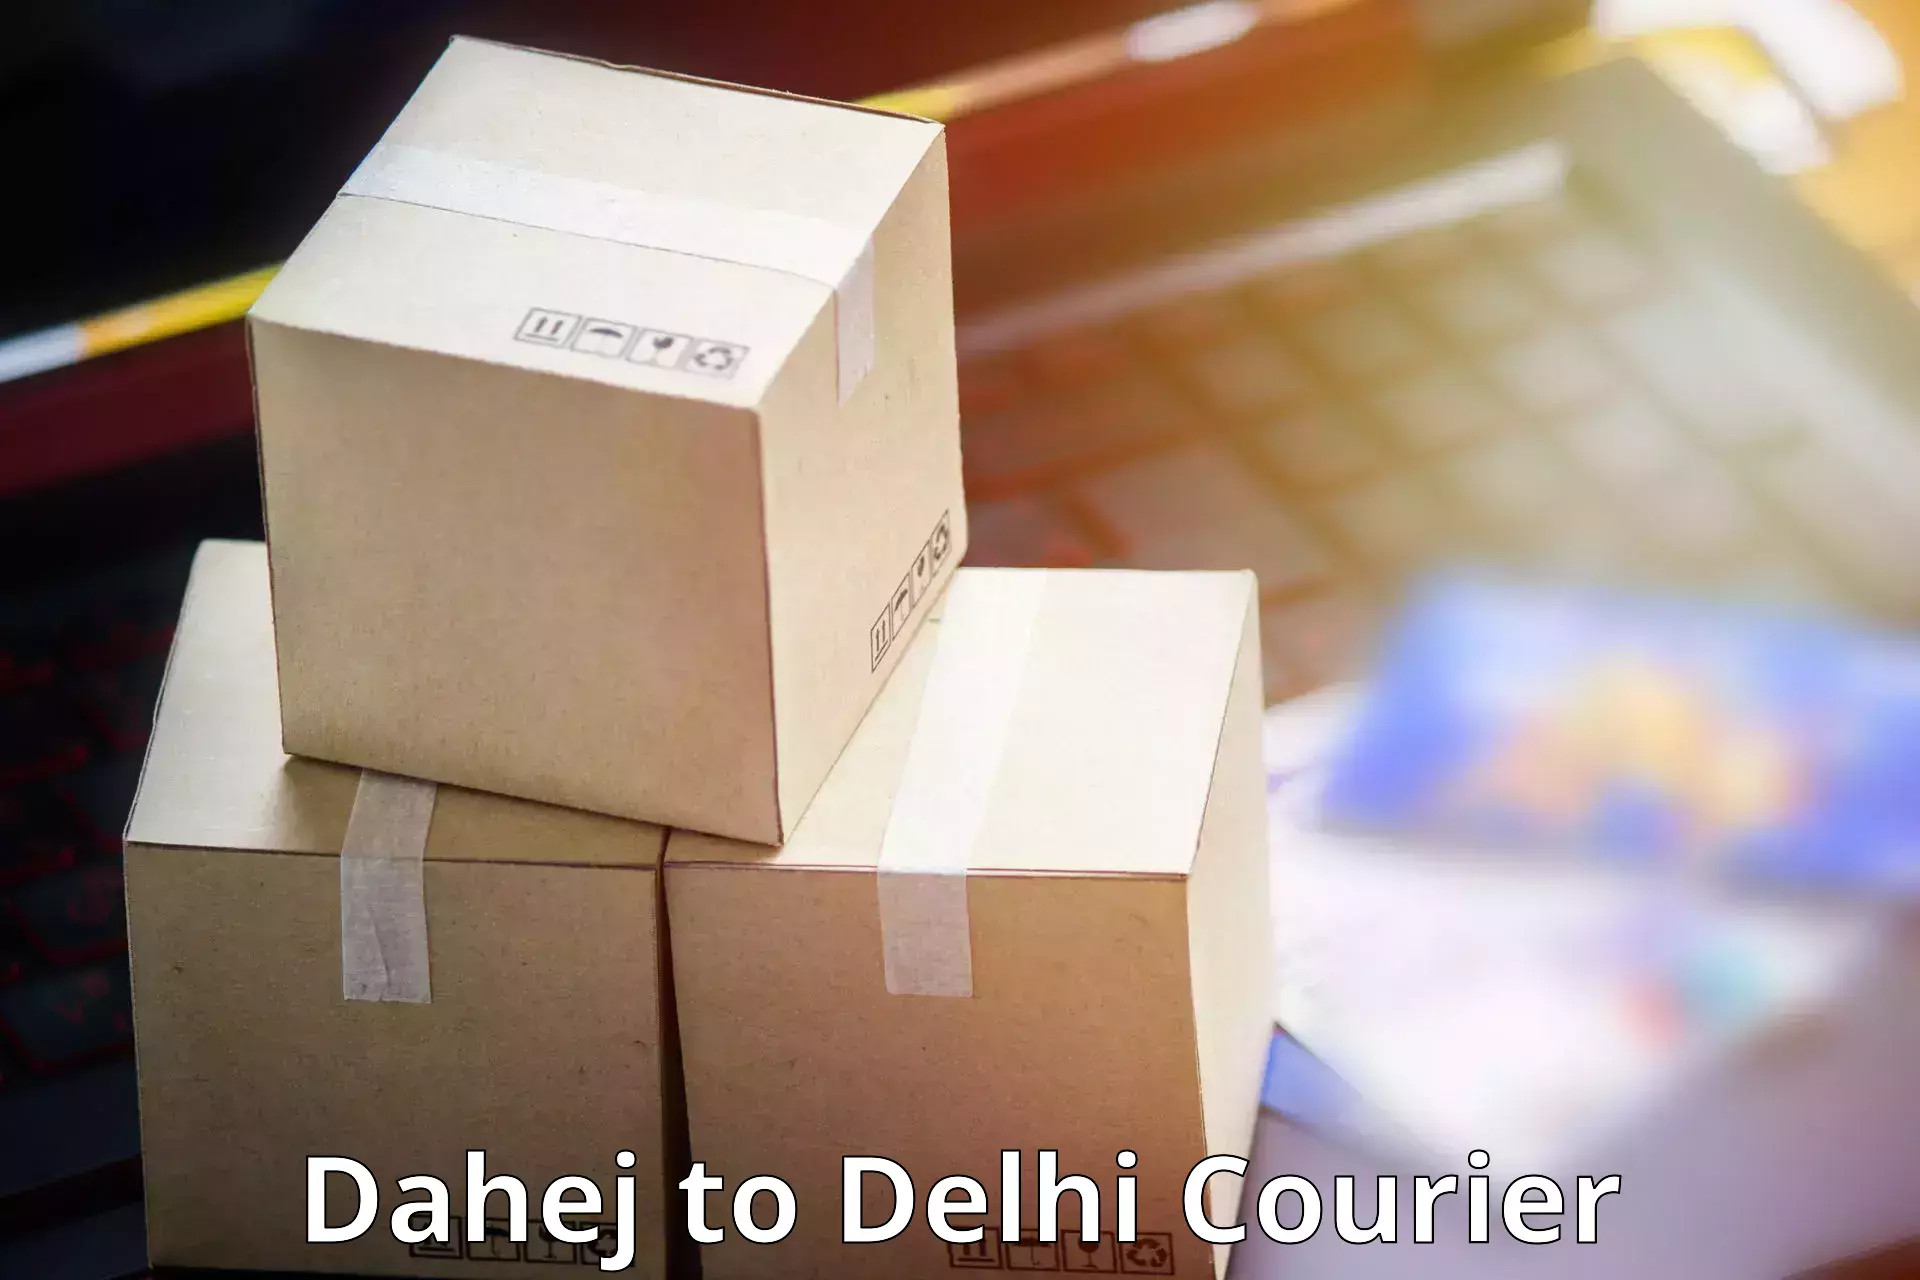 On-call courier service Dahej to Lodhi Road